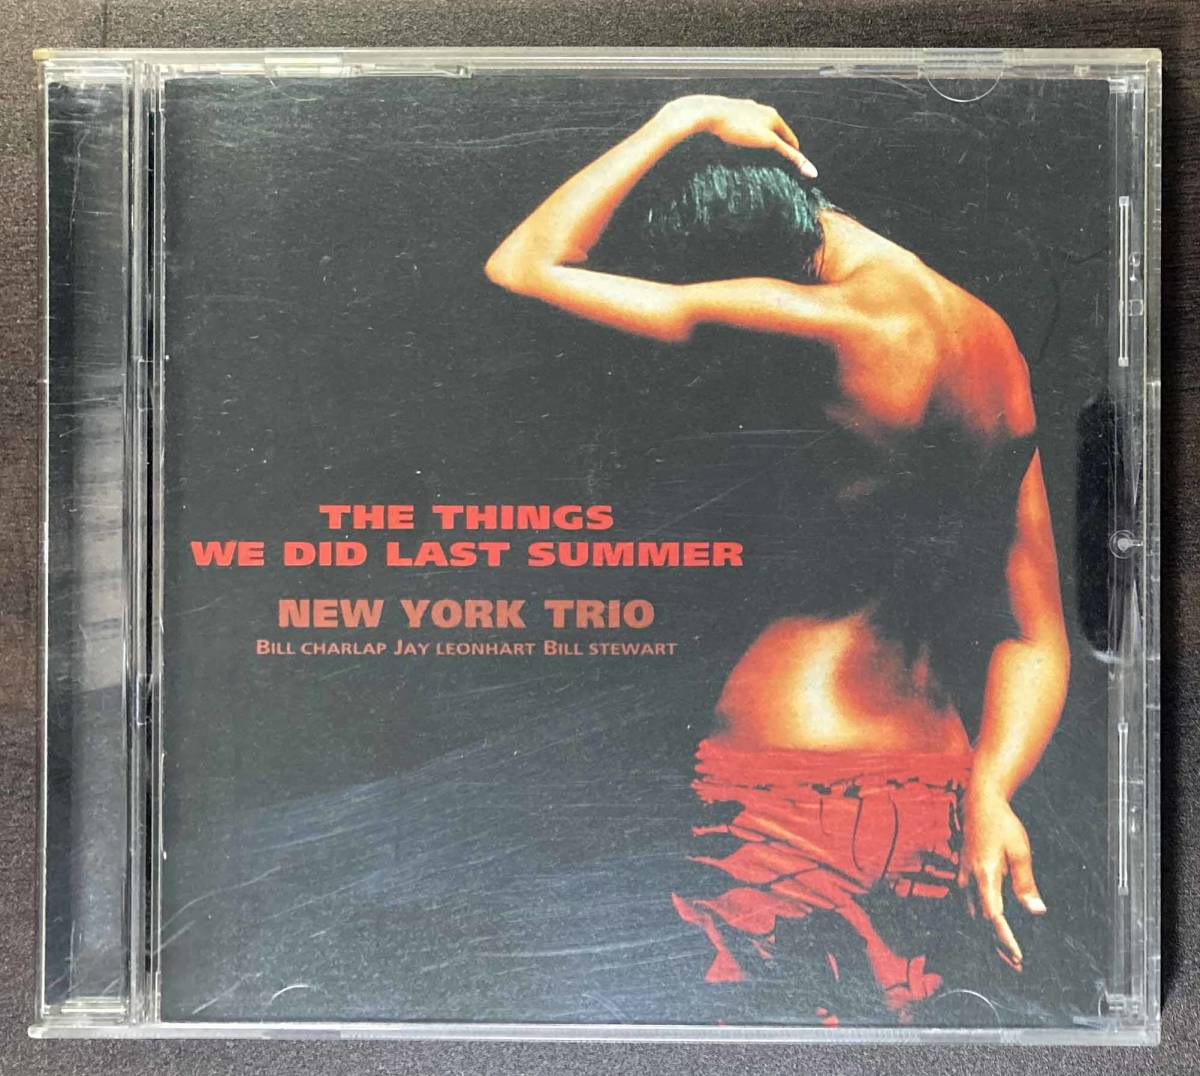  New York Trio / The Things We Did Last Summer 中古CD　国内盤　帯付き_画像2